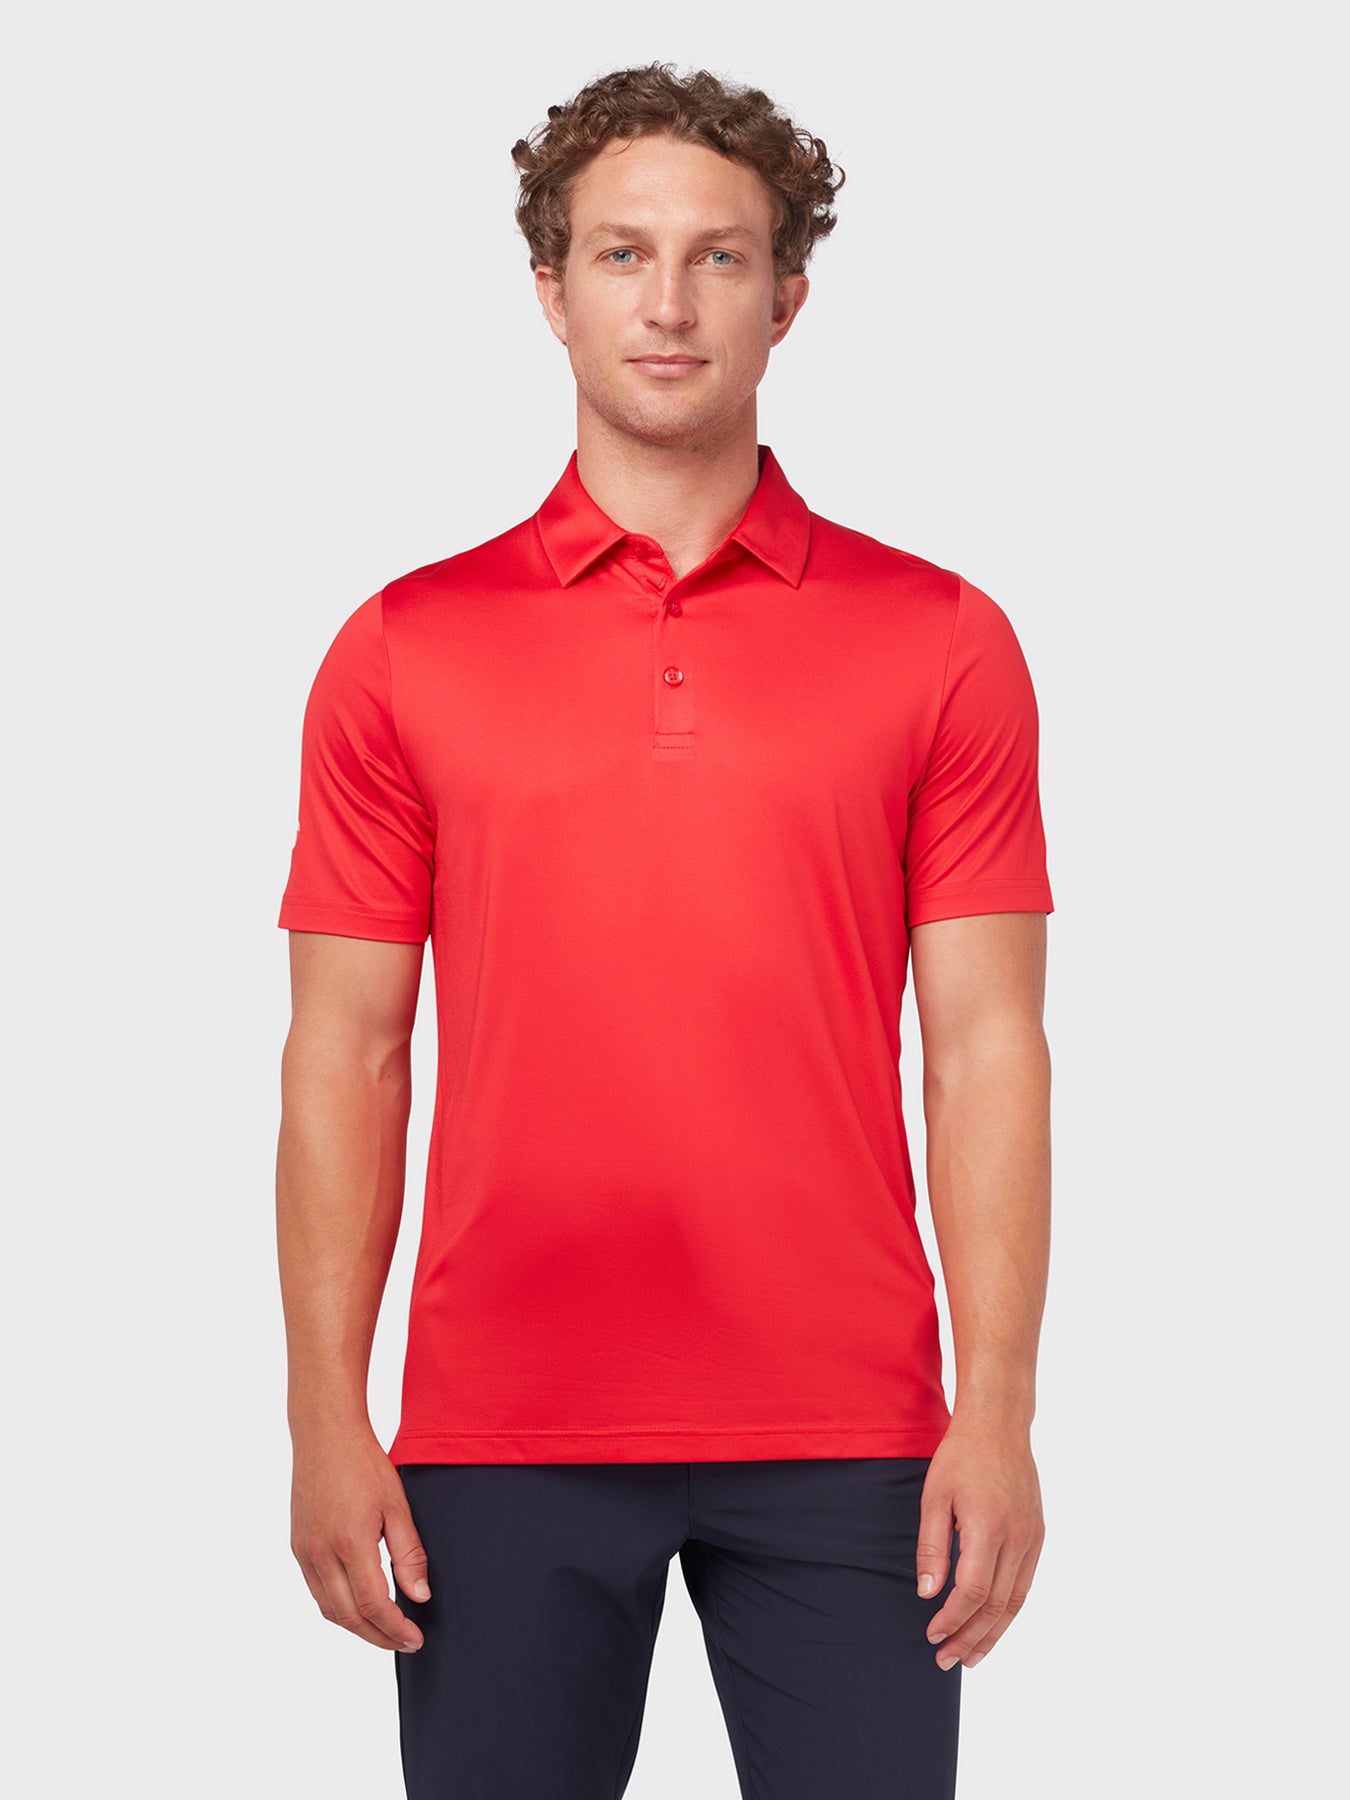 View Swing Tech Tour Polo In True Red True Red L information